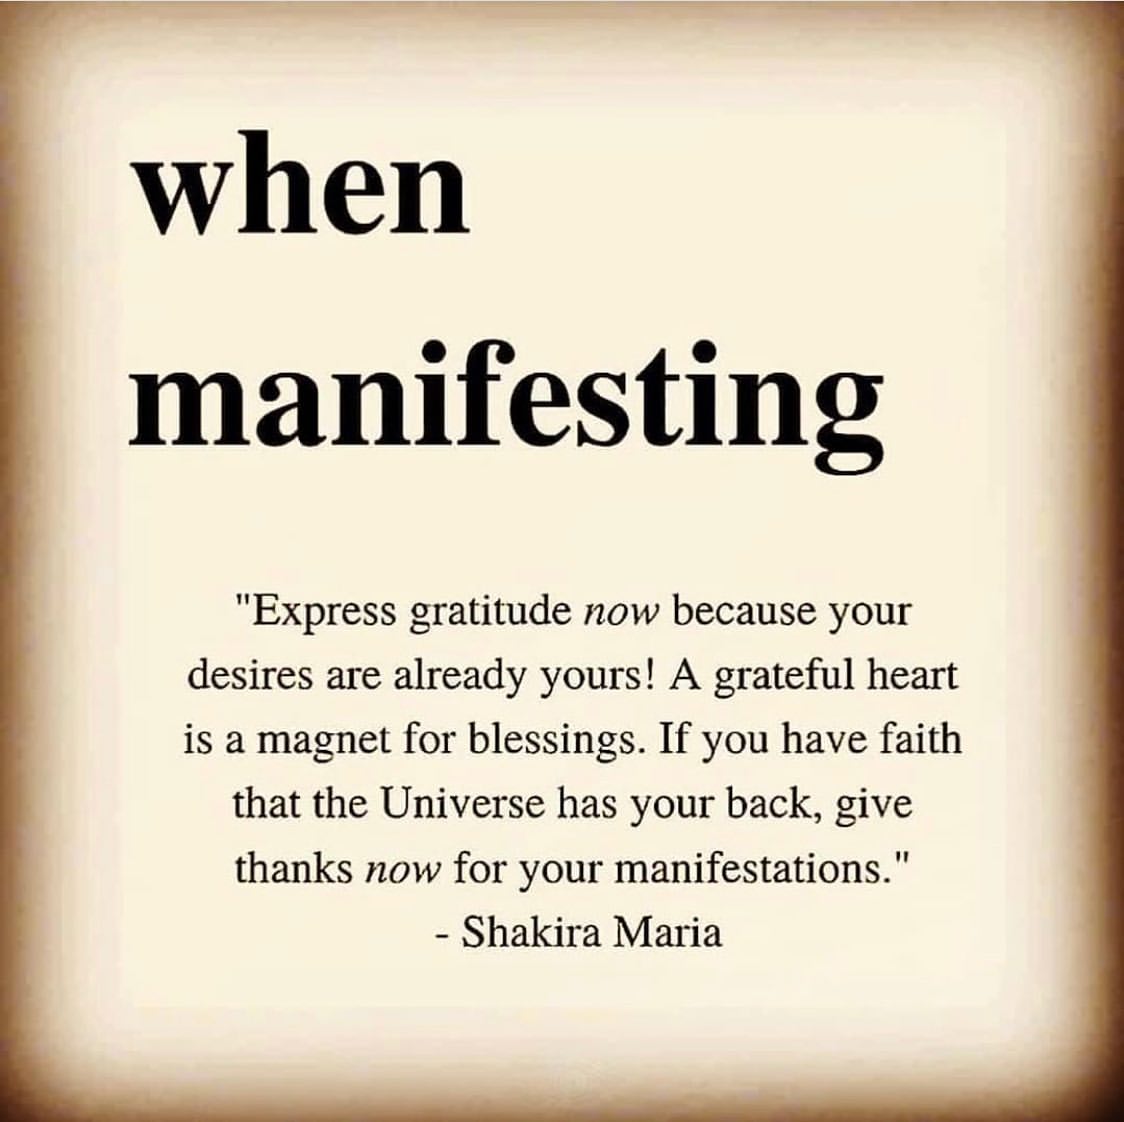 When manifesting "Express gratitude now because your desires are already yours! A grateful heart is a magnet for blessings. If you have faith that the Universe has your back, give thanks now for your manifestations.